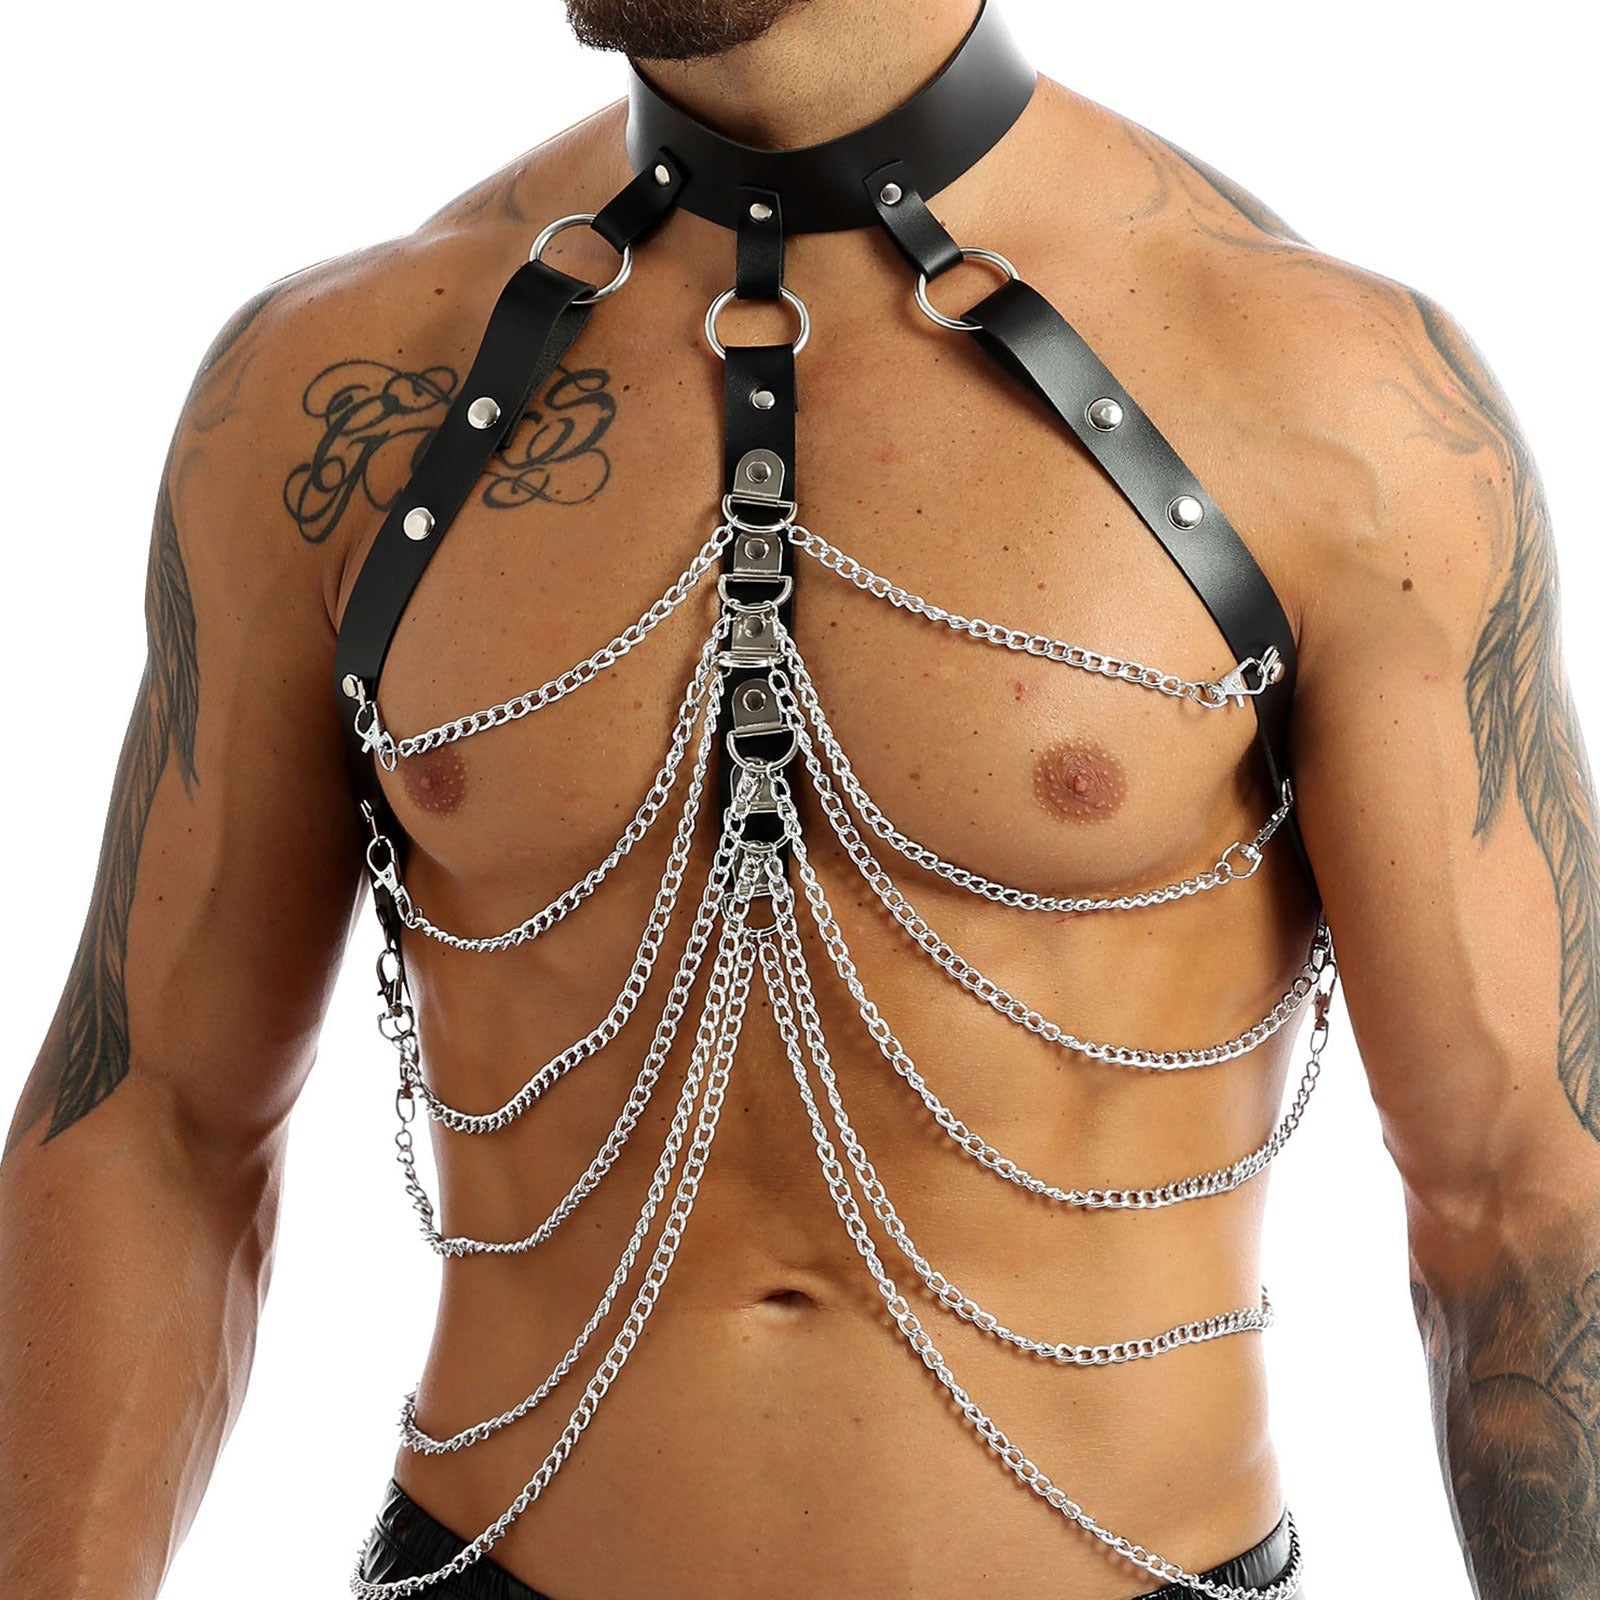 Mens Fashion Body Shoulder Chest Belt Harness / PU Leather Harness Chain Halter - HARD'N'HEAVY